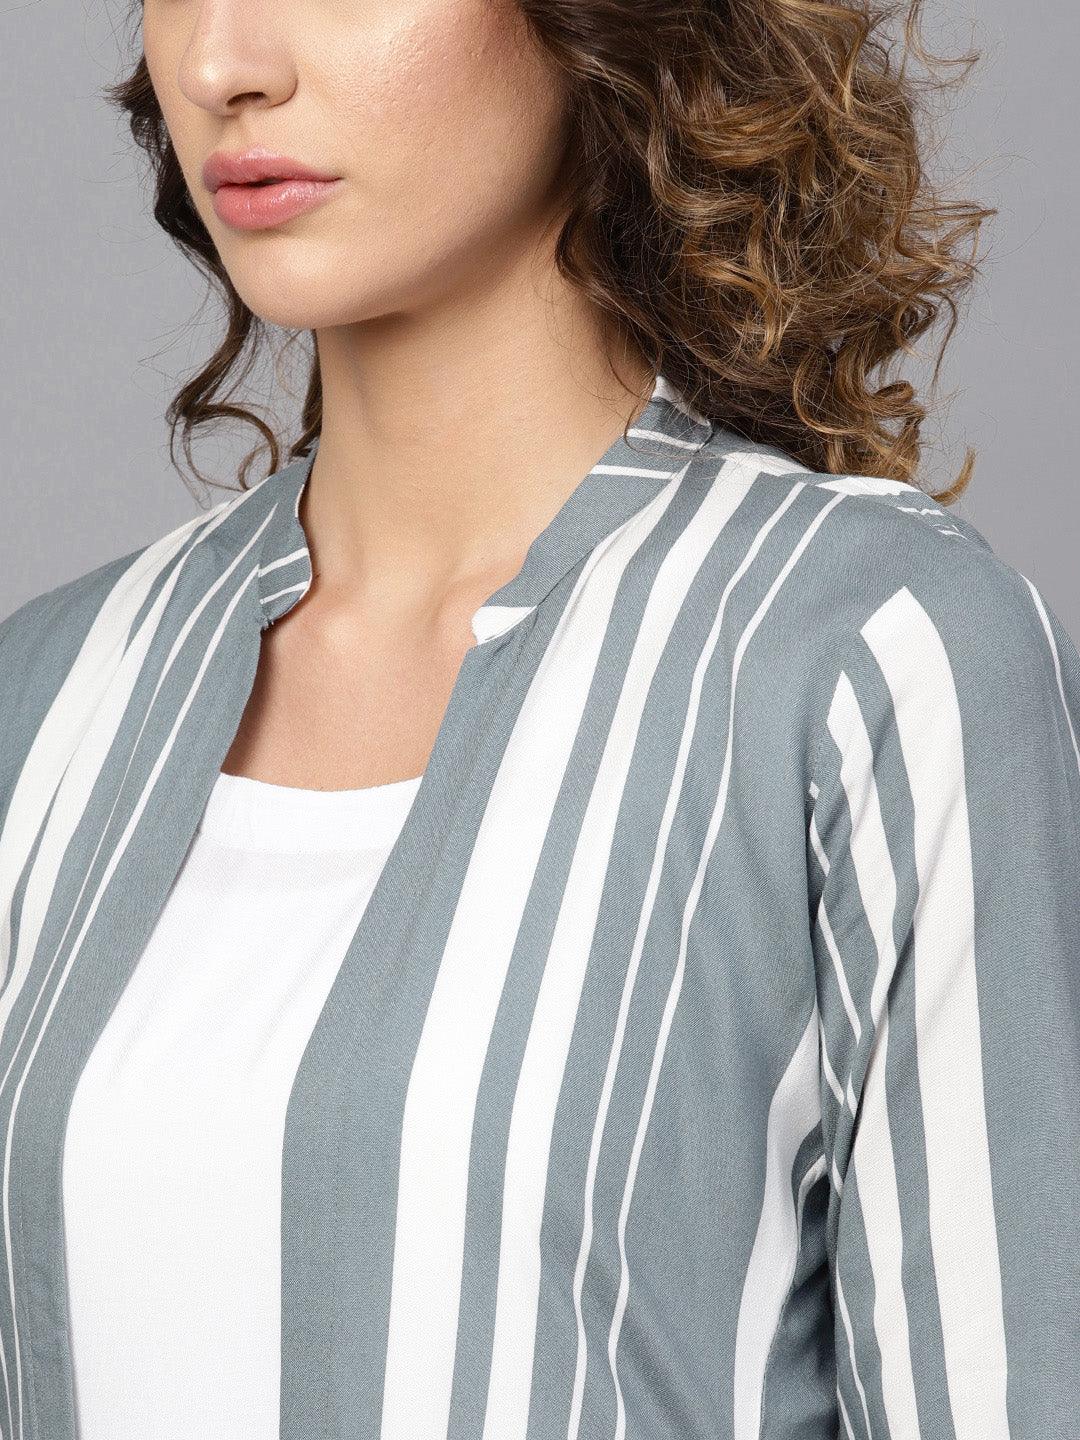 White Striped Rayon Dress With Jacket